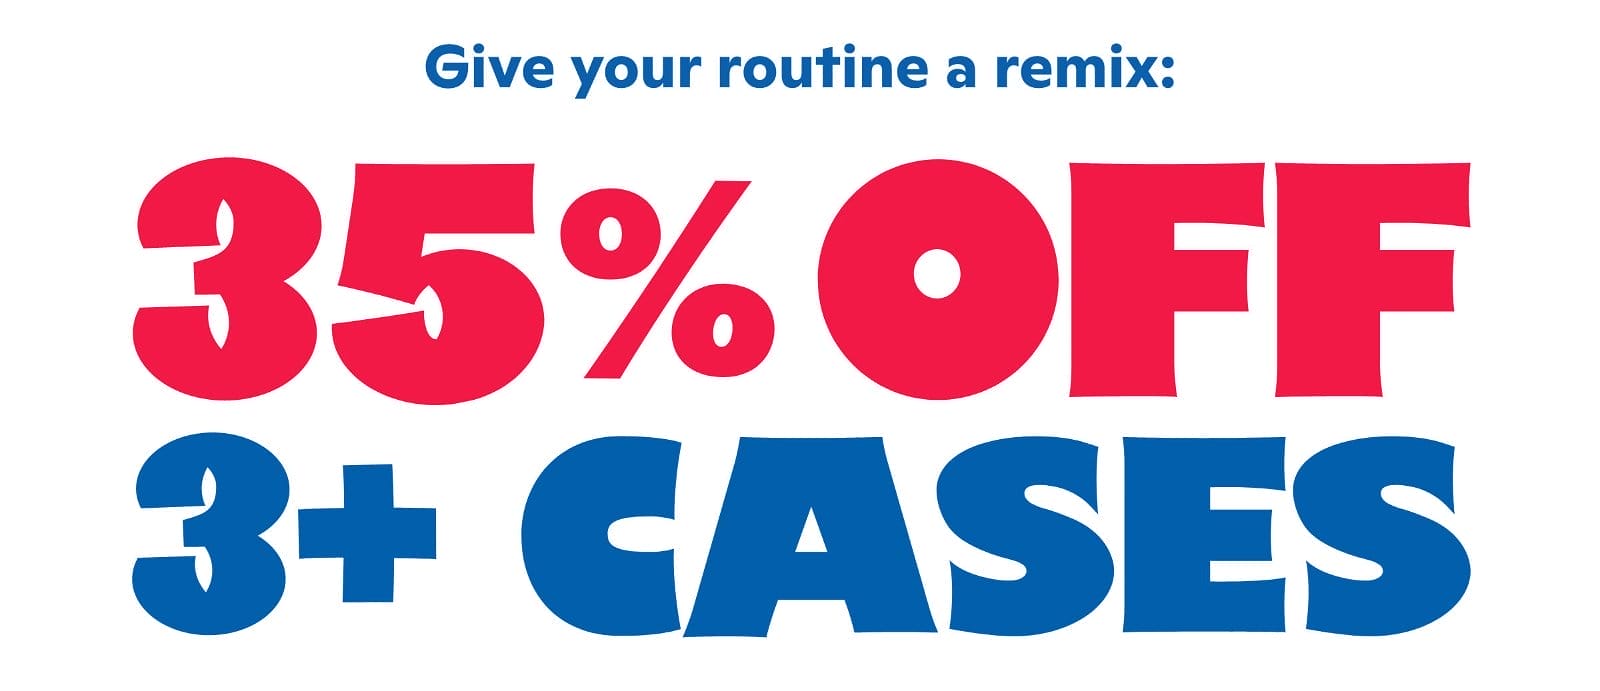 Give your routine a remix: 35% off 3+ Cases